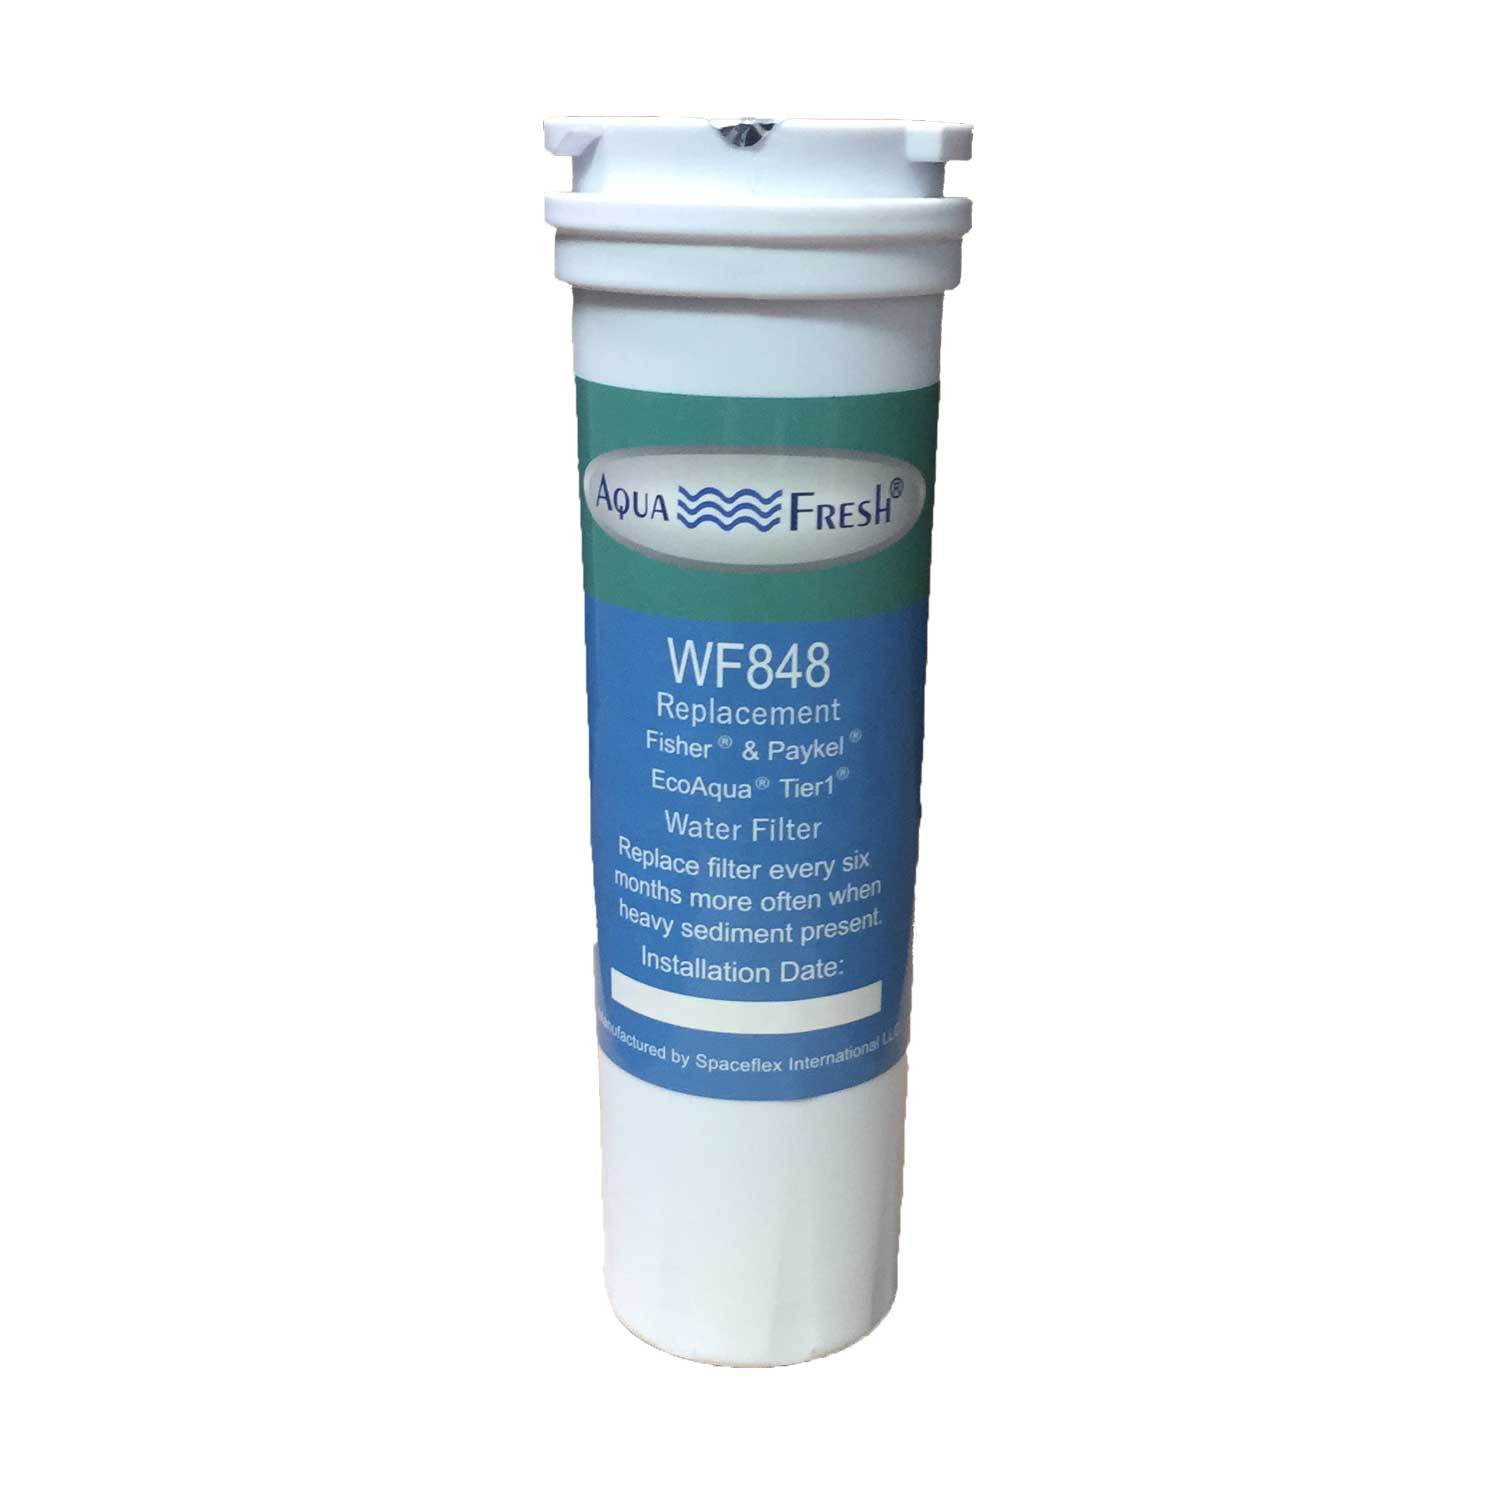 Aqua Fresh WF848 Replacement for Fisher & Paykel 836848 Refrigerator Water Filter